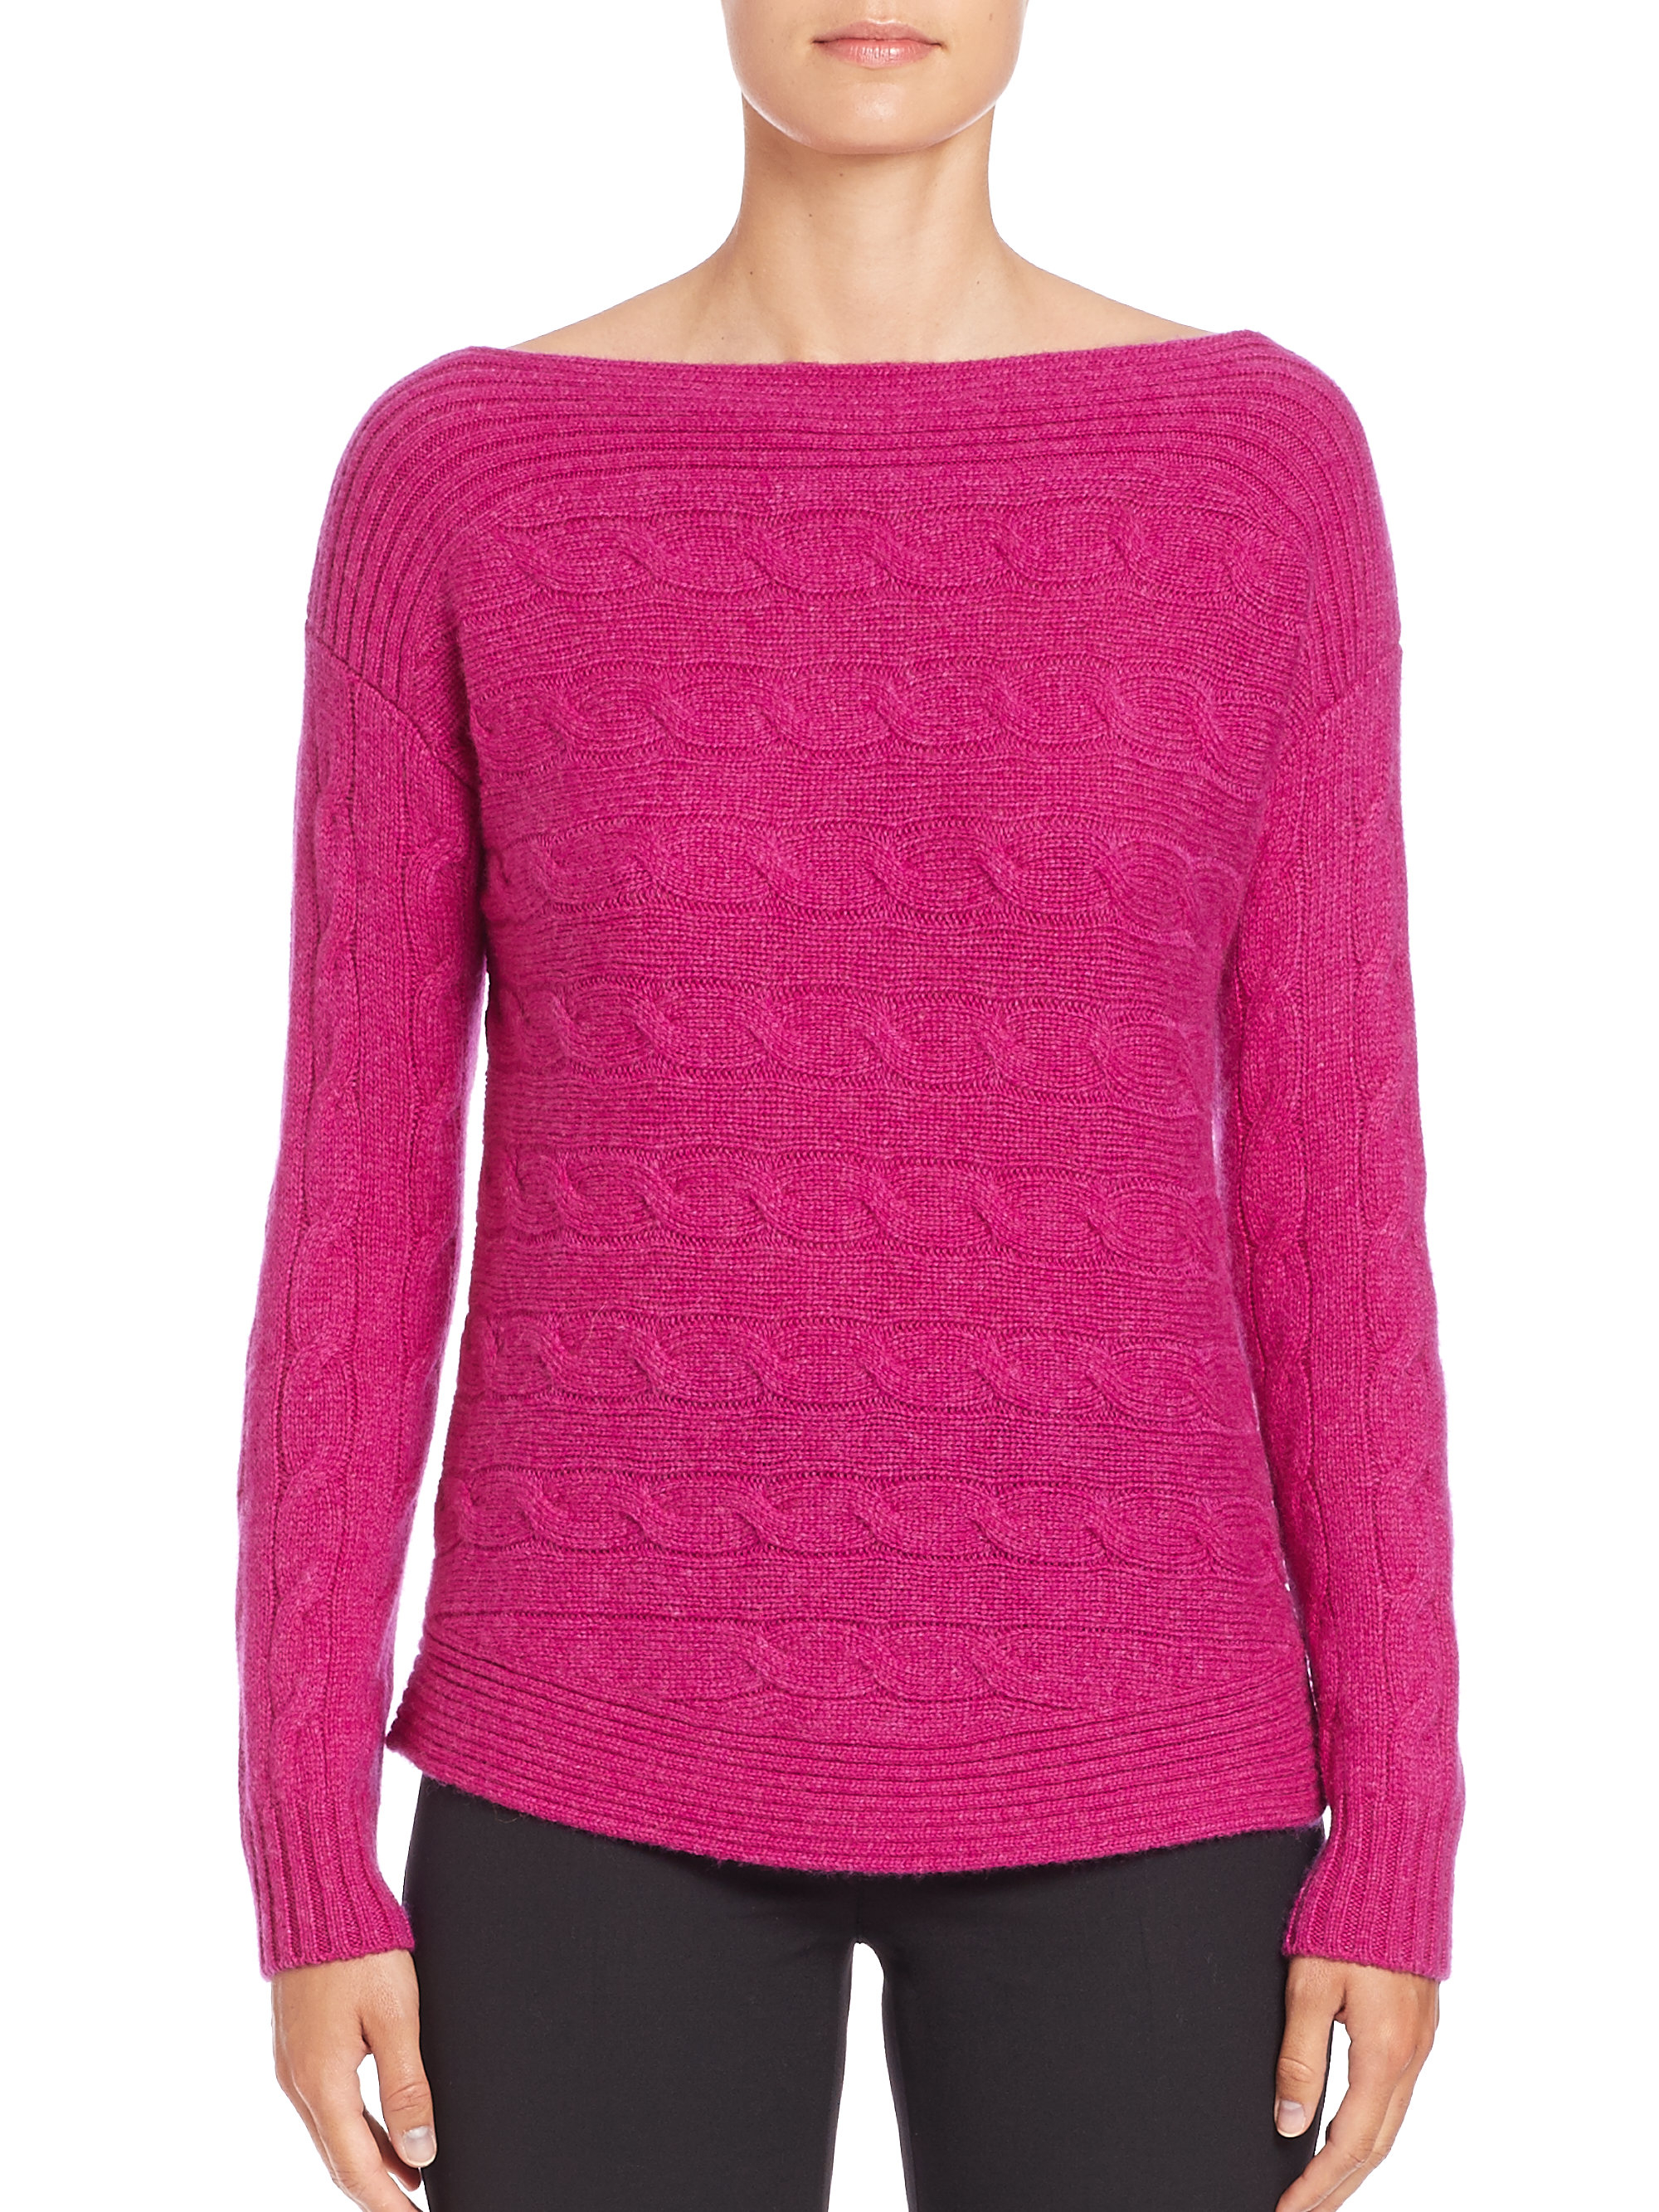 Lyst - Ralph Lauren Collection Cable-knit Cashmere Sweater in Pink